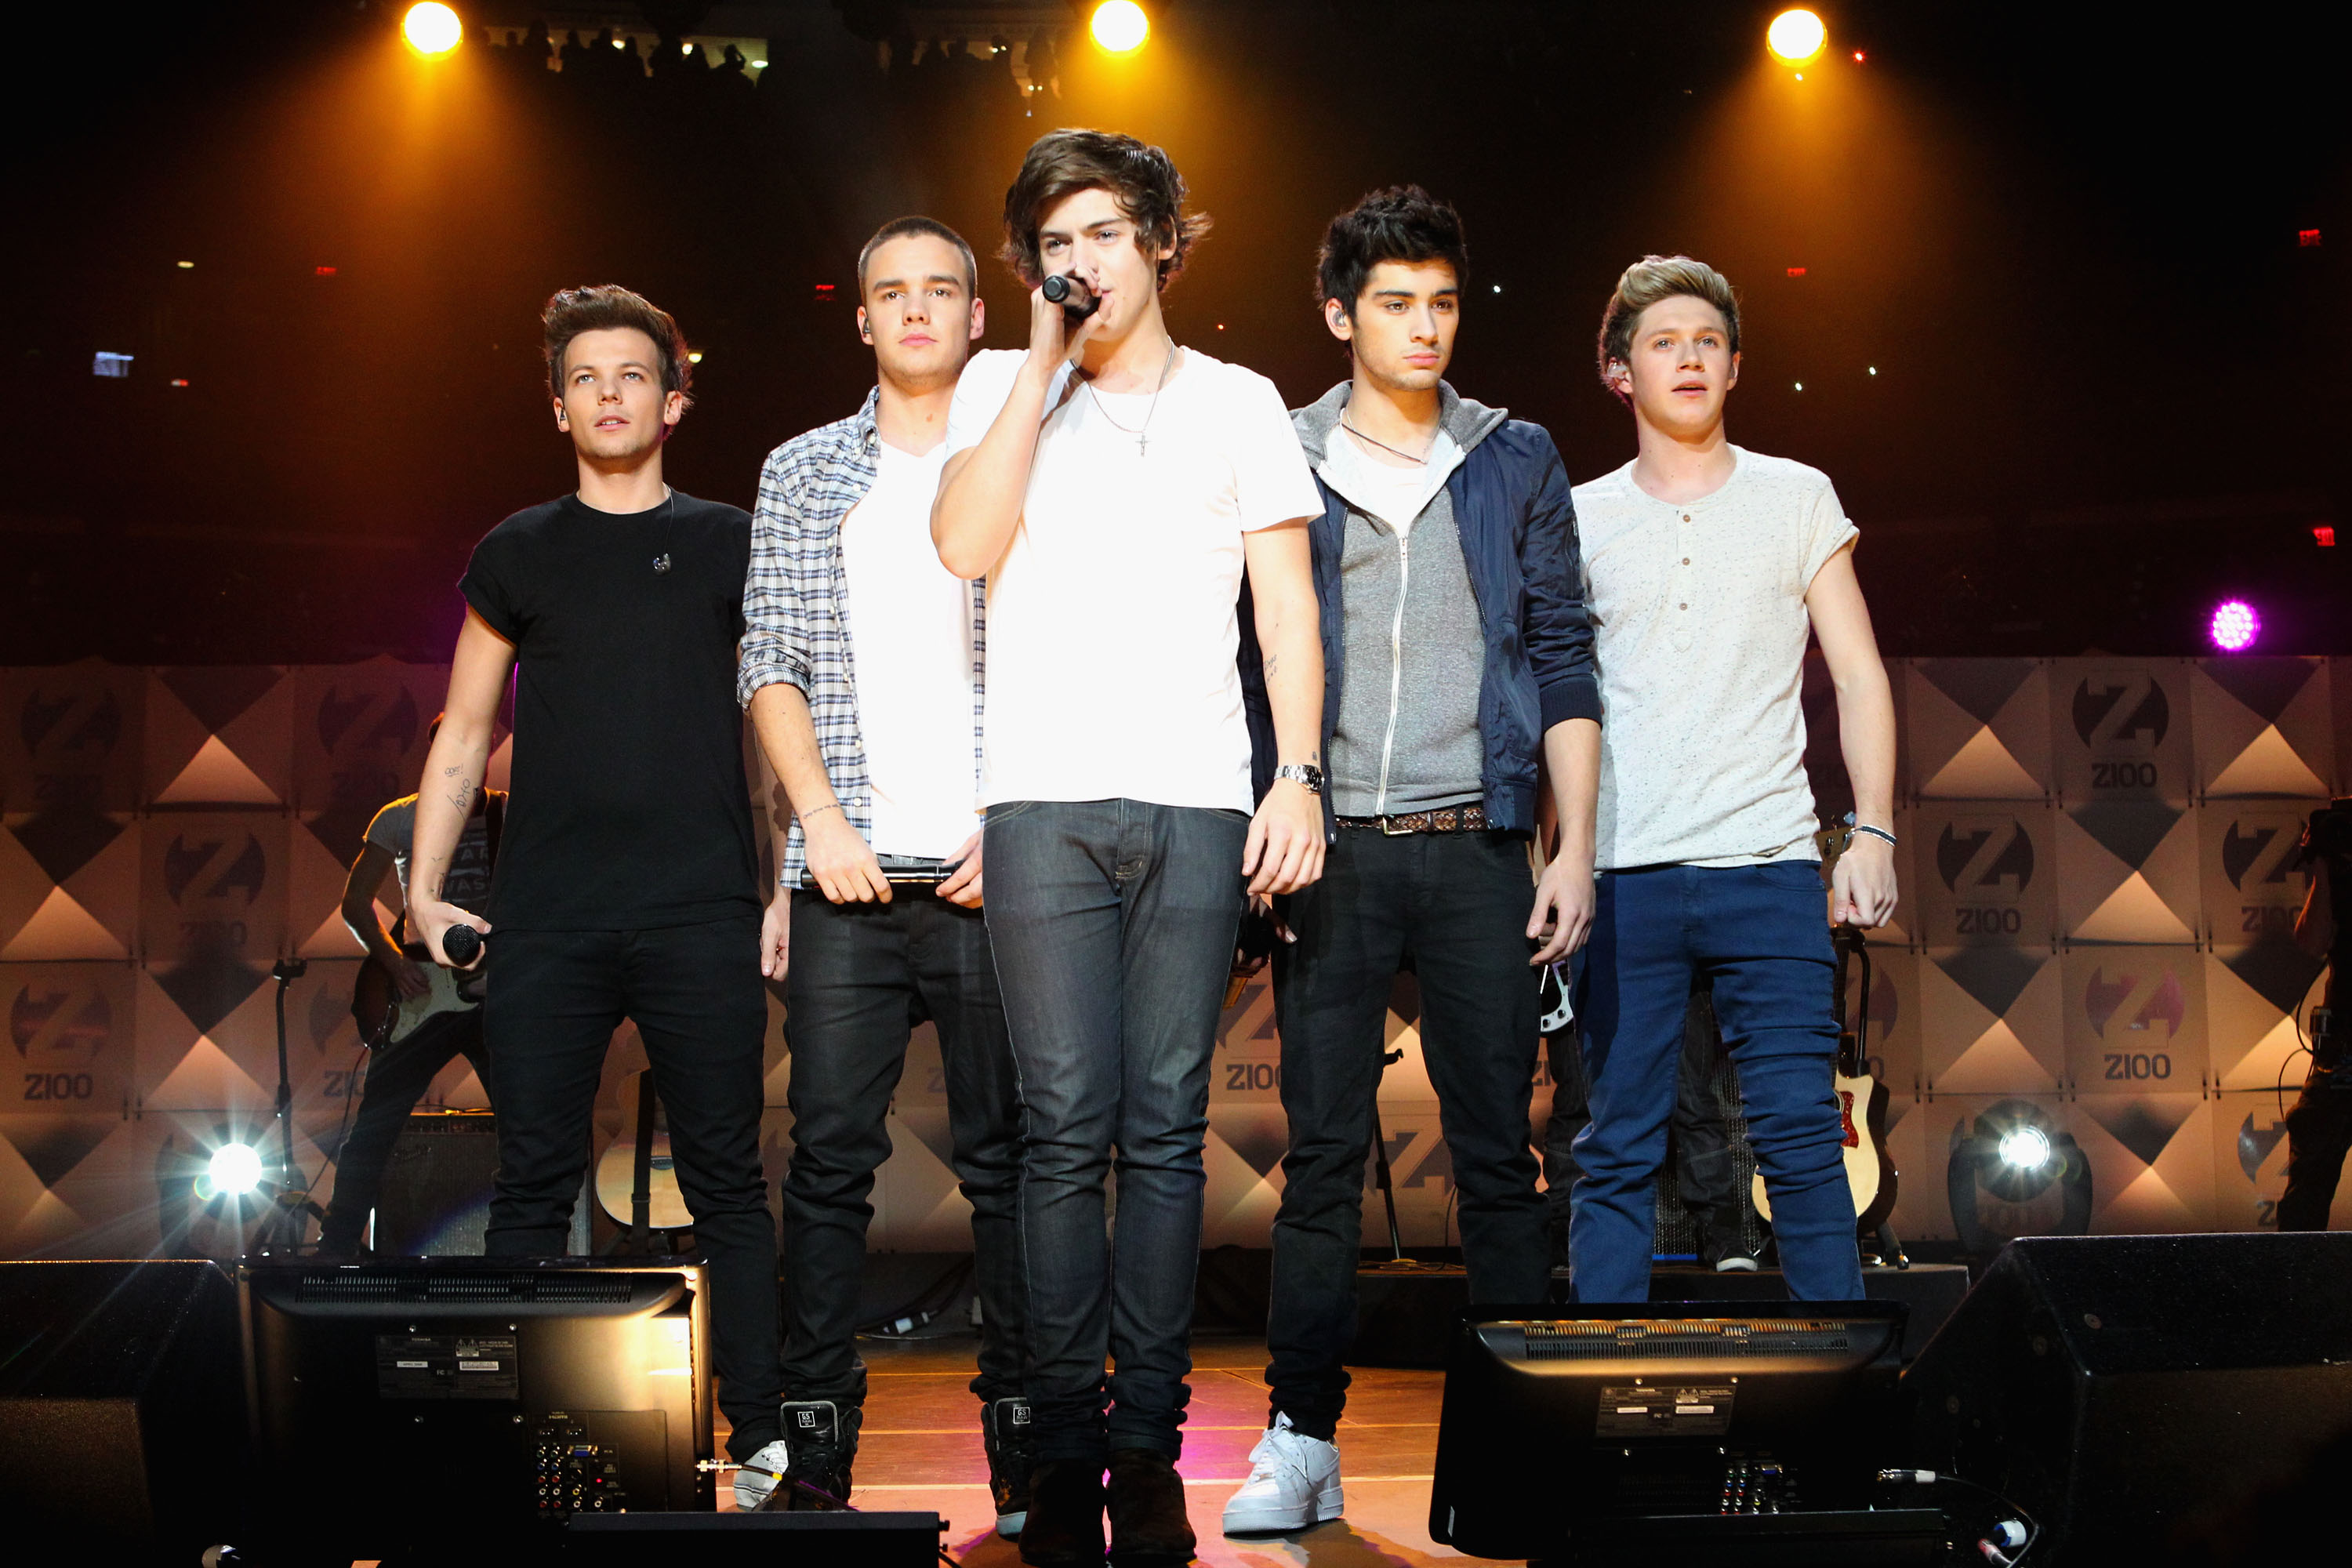 Louis Tomlinson, Liam Payne, Harry Styles, Zayn Malik and Niall Horan of One Direction perform in Z100's Jingle Ball